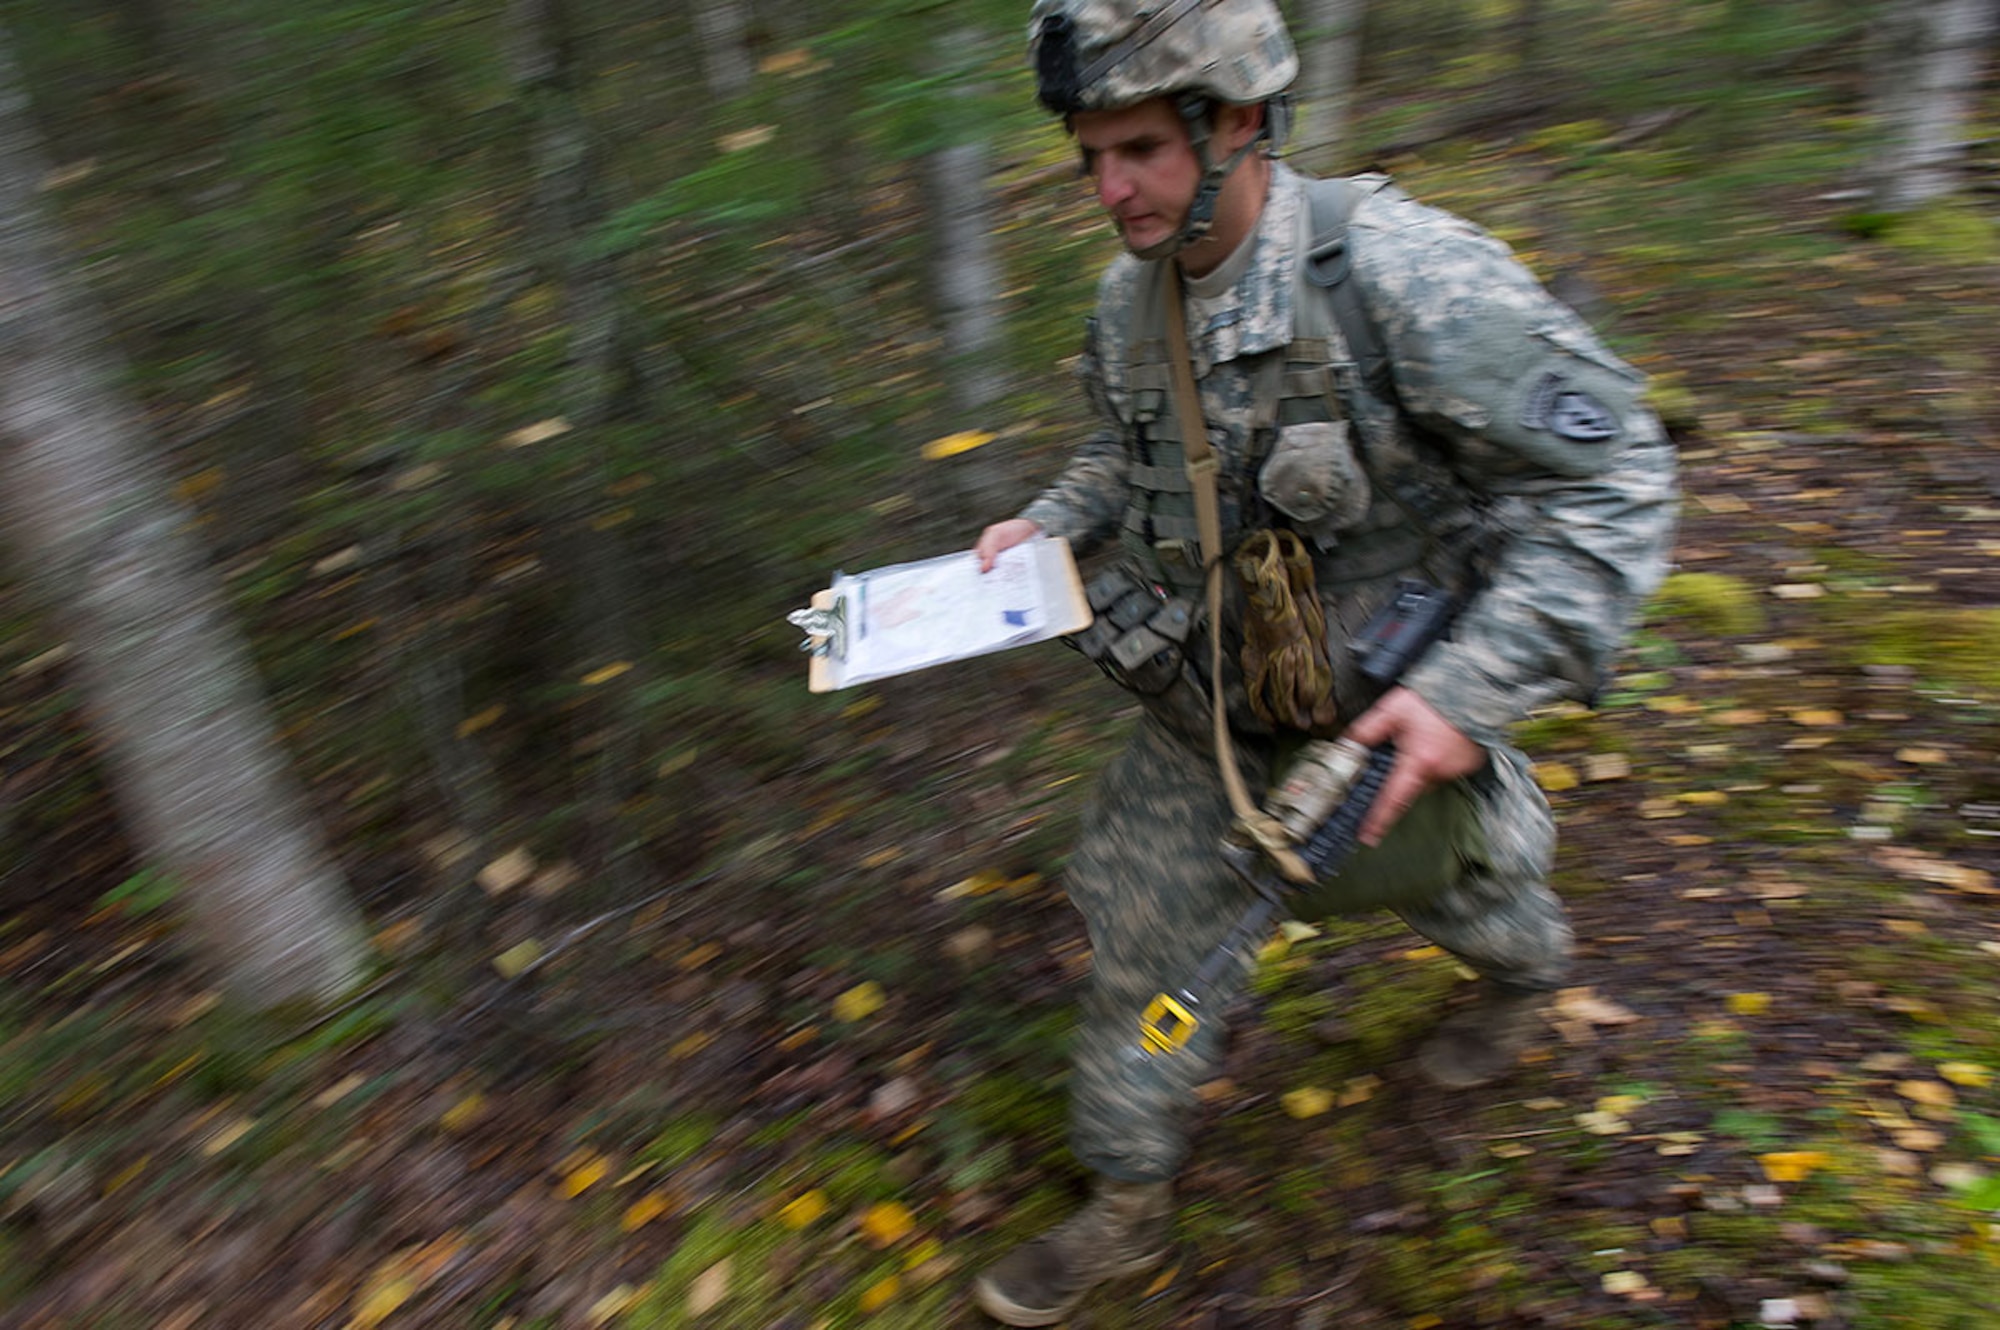 Spc. Mattew Ward, a native of Westminster, Md., assigned to Dog Company, 3rd Battalion (Airborne), 509th Infantry Regiment, 4th Infantry Brigade Combat Team (Airborne), 25th Infantry Division, U.S. Army Alaska, moves to a point on the land navigation course during Expert Infantryman Badge qualification on Joint Base Elmendorf-Richardson, Tuesday, Sept. 9, 2014. The Expert Infantryman Badge was approved by the Secretary of War on October 7, 1943, and is currently awarded to U.S. Army personnel who hold infantry or special forces military occupational specialties and successfully pass the rigors of the course. (U.S. Air Force photo/Justin Connaher)